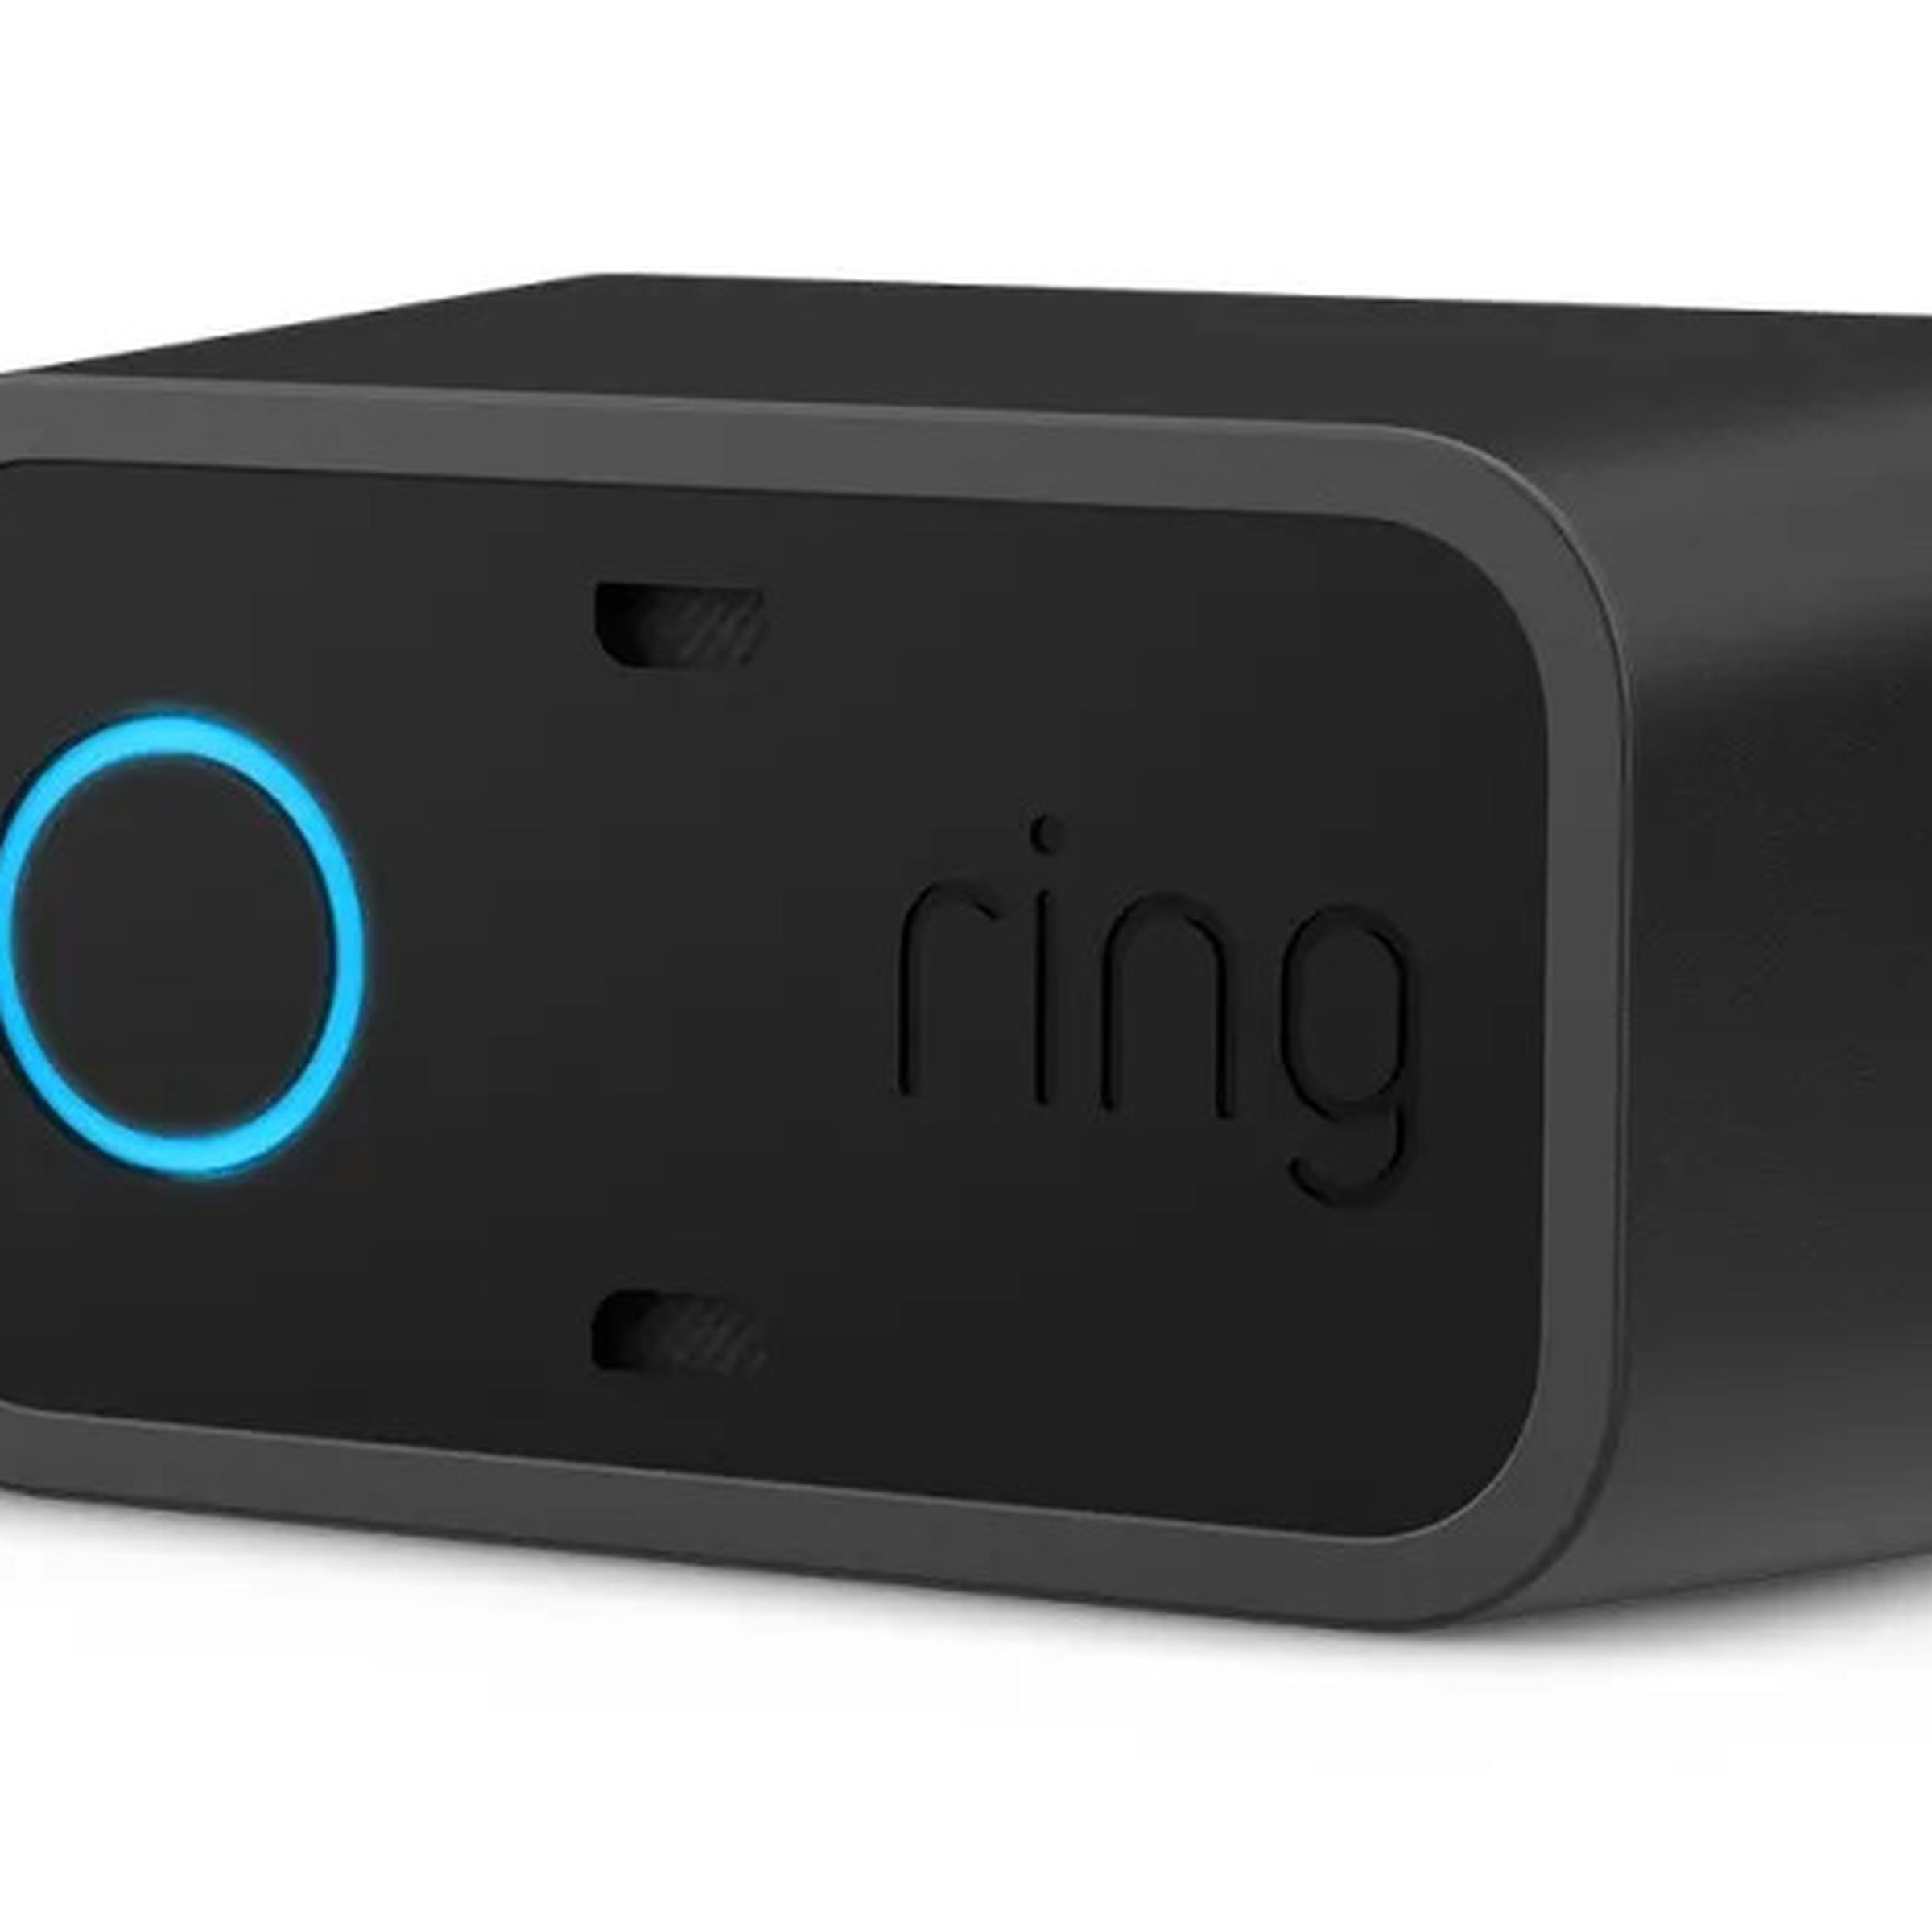 A leaked image showing Ring’s car alarm device